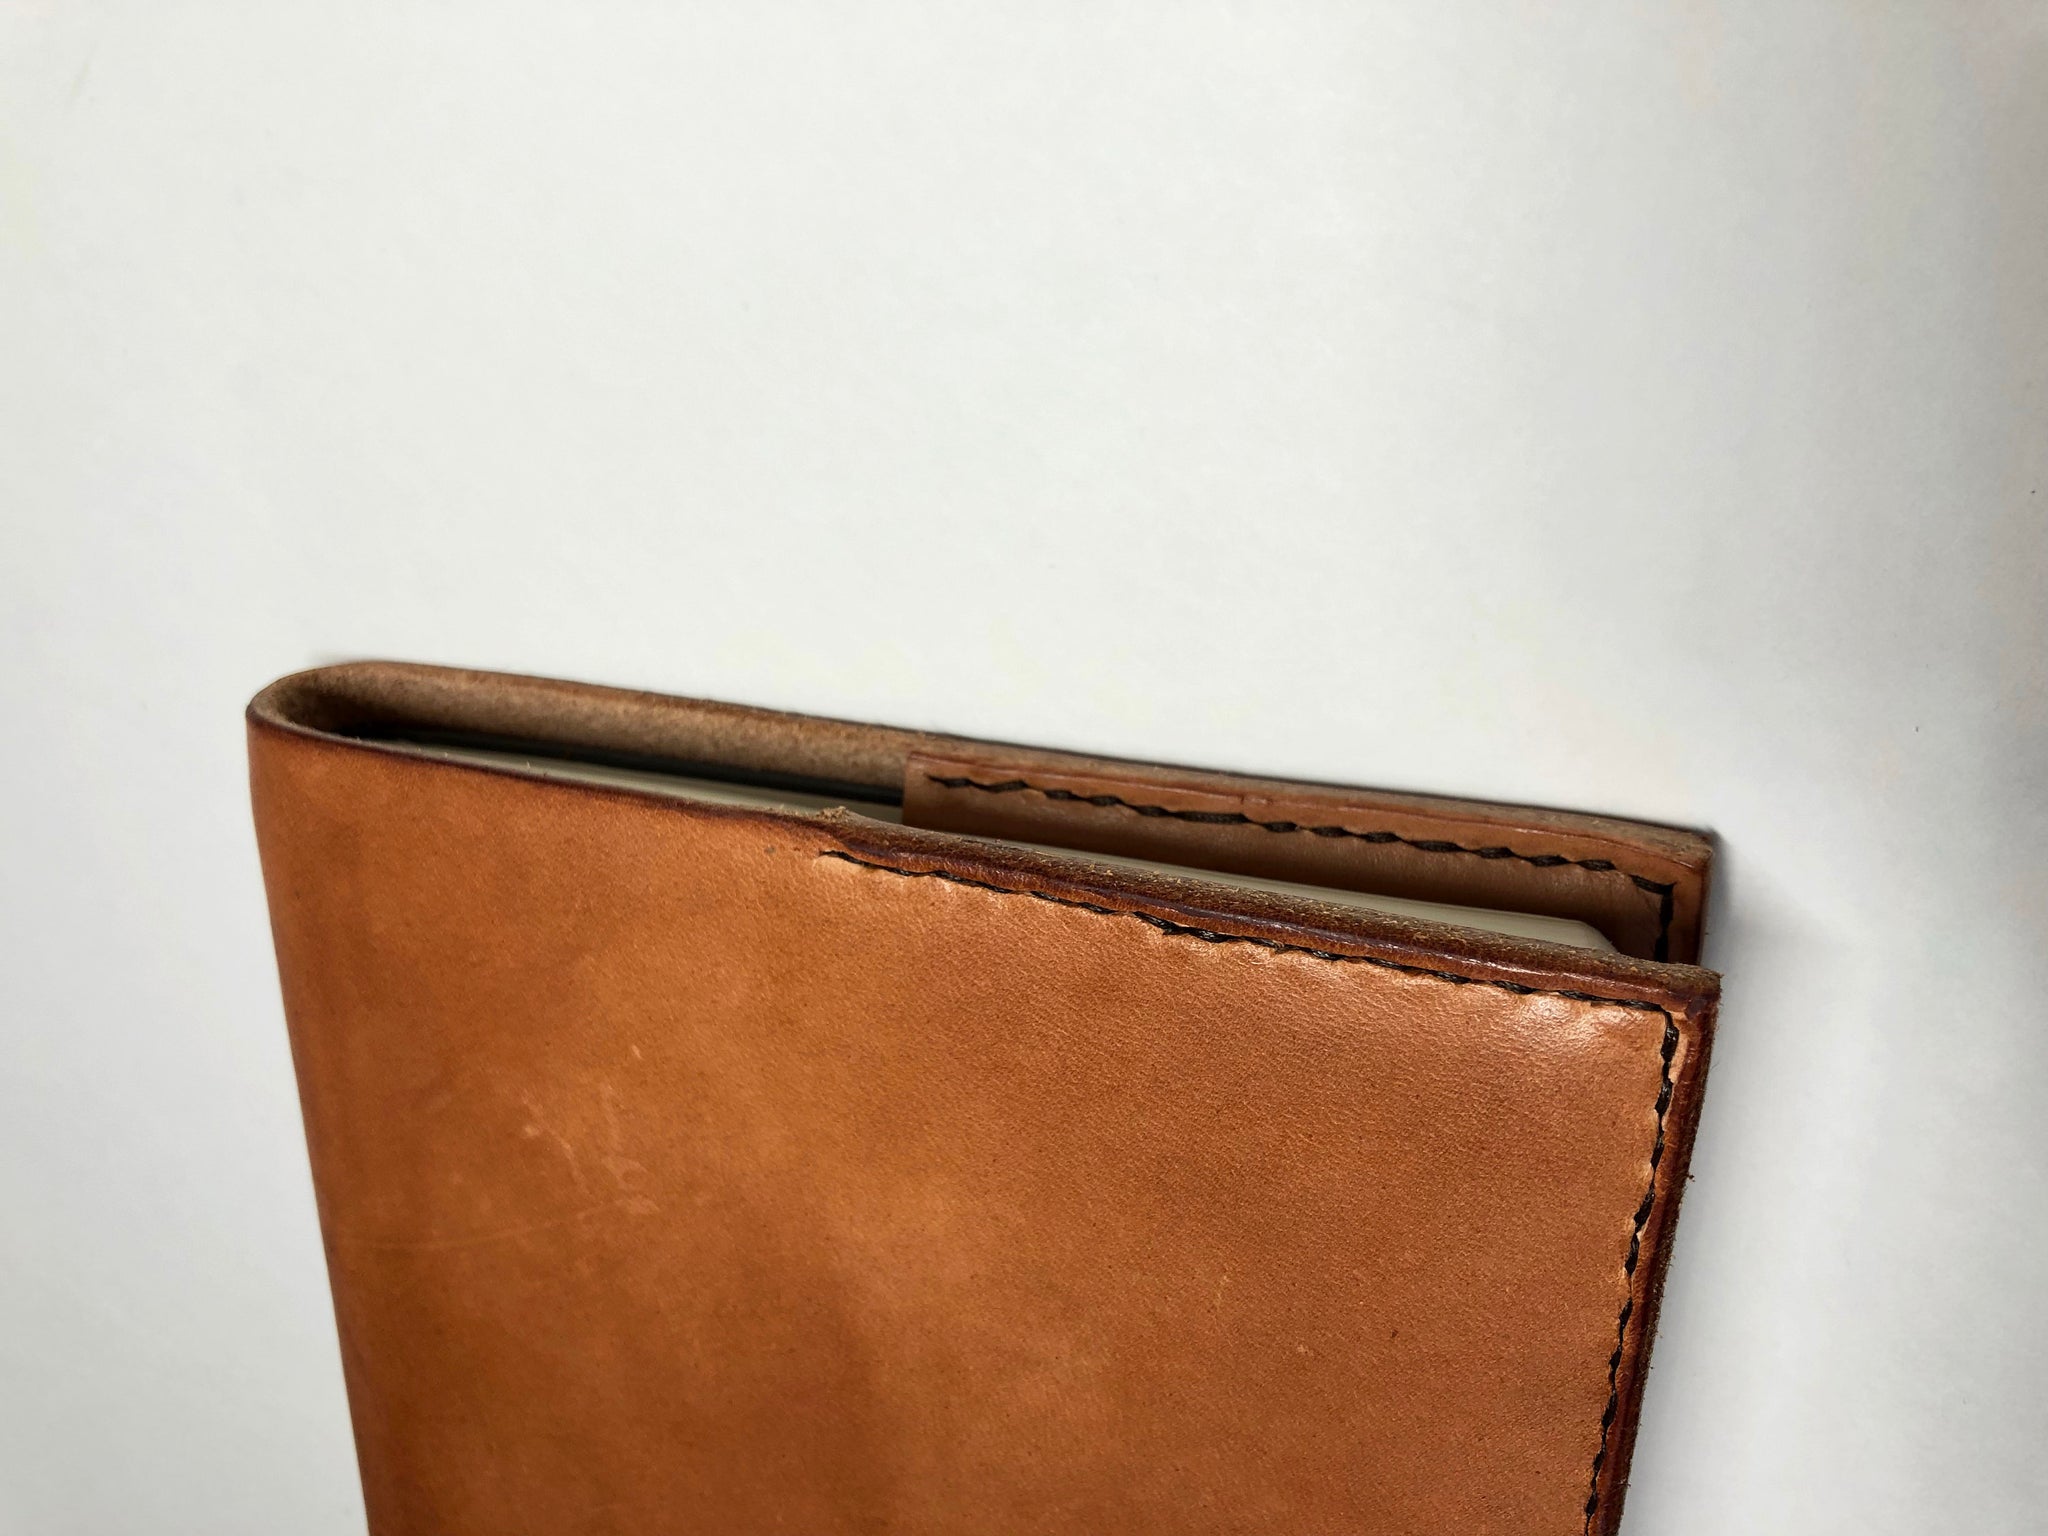 Rigby Leather and Canvas Notebook Cover